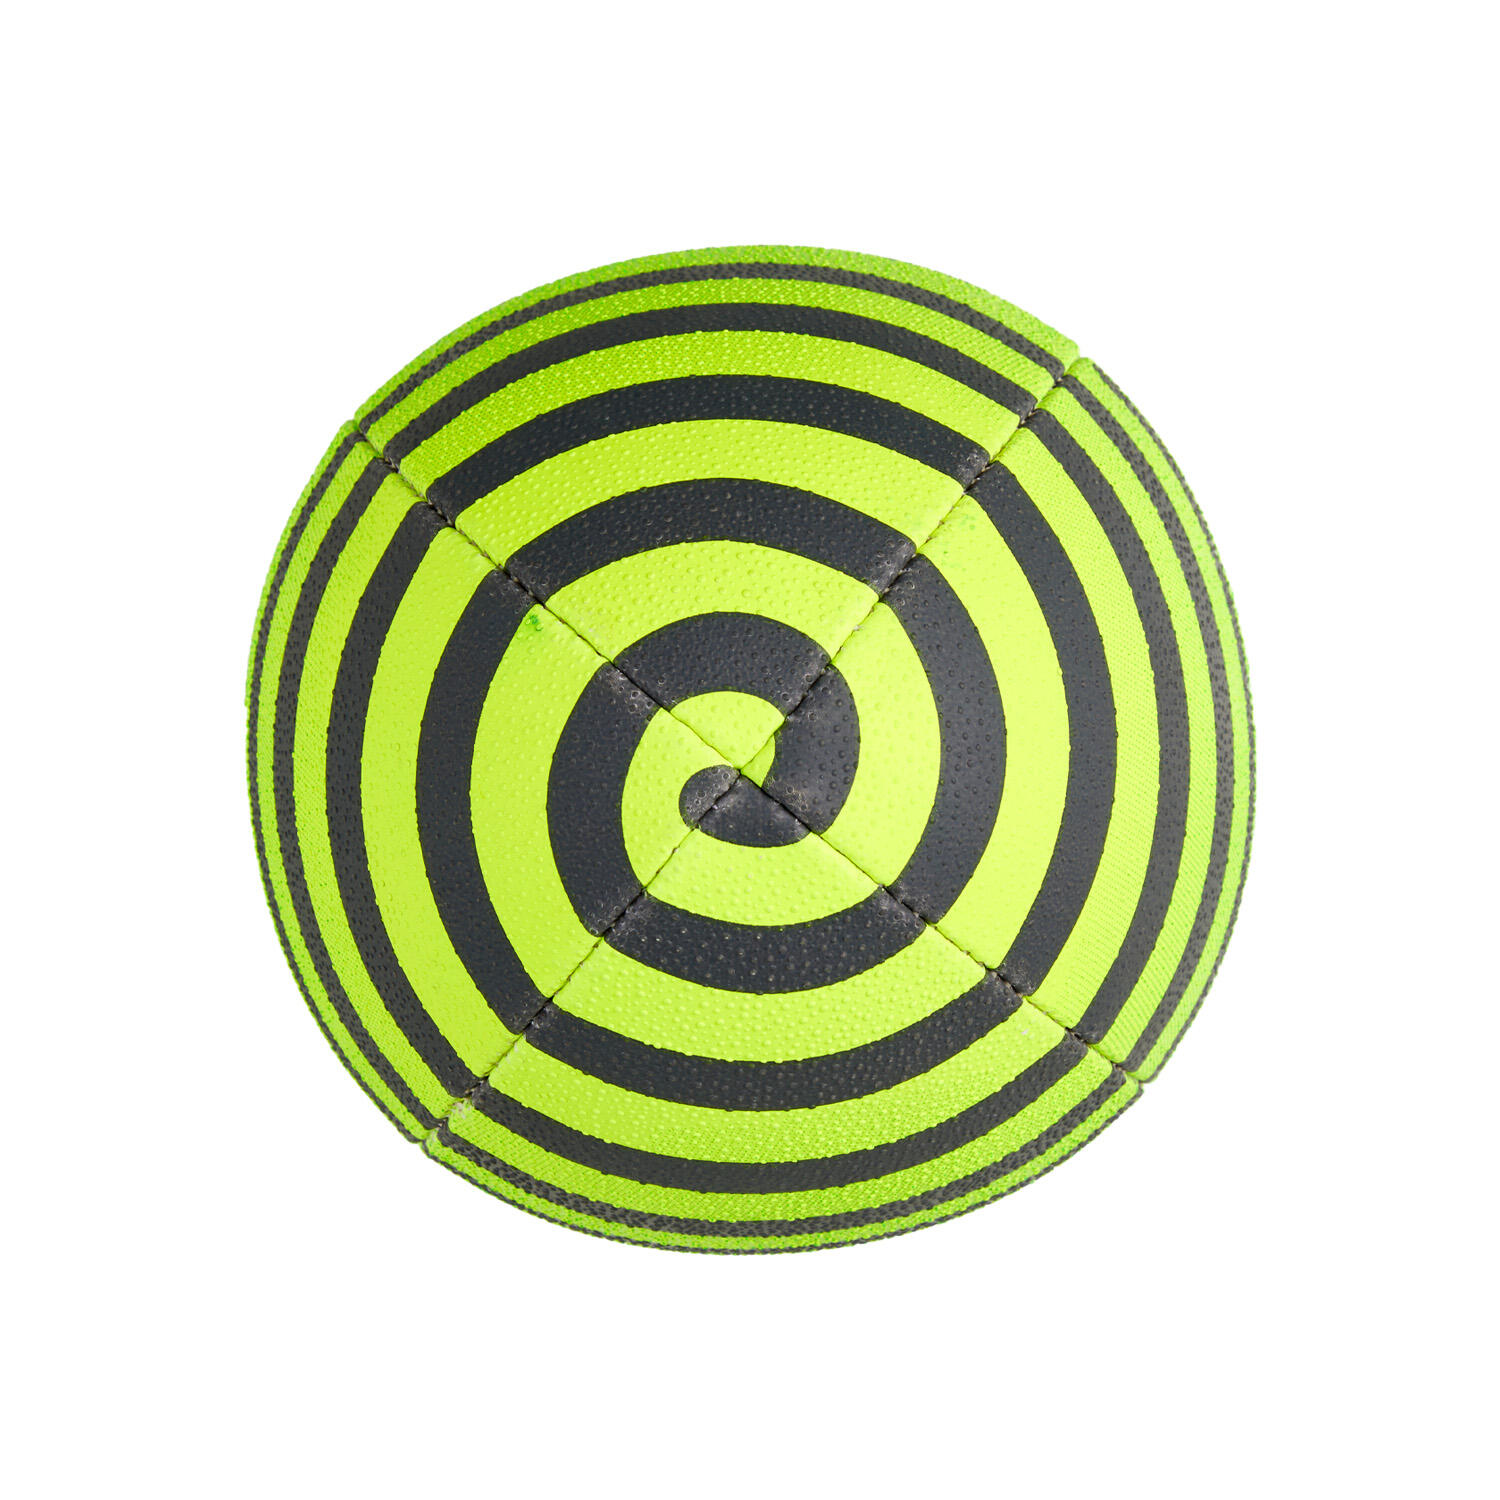 Ram Rugby Ball - Squad - Trainer - (Size 3) - Spiral 4/6